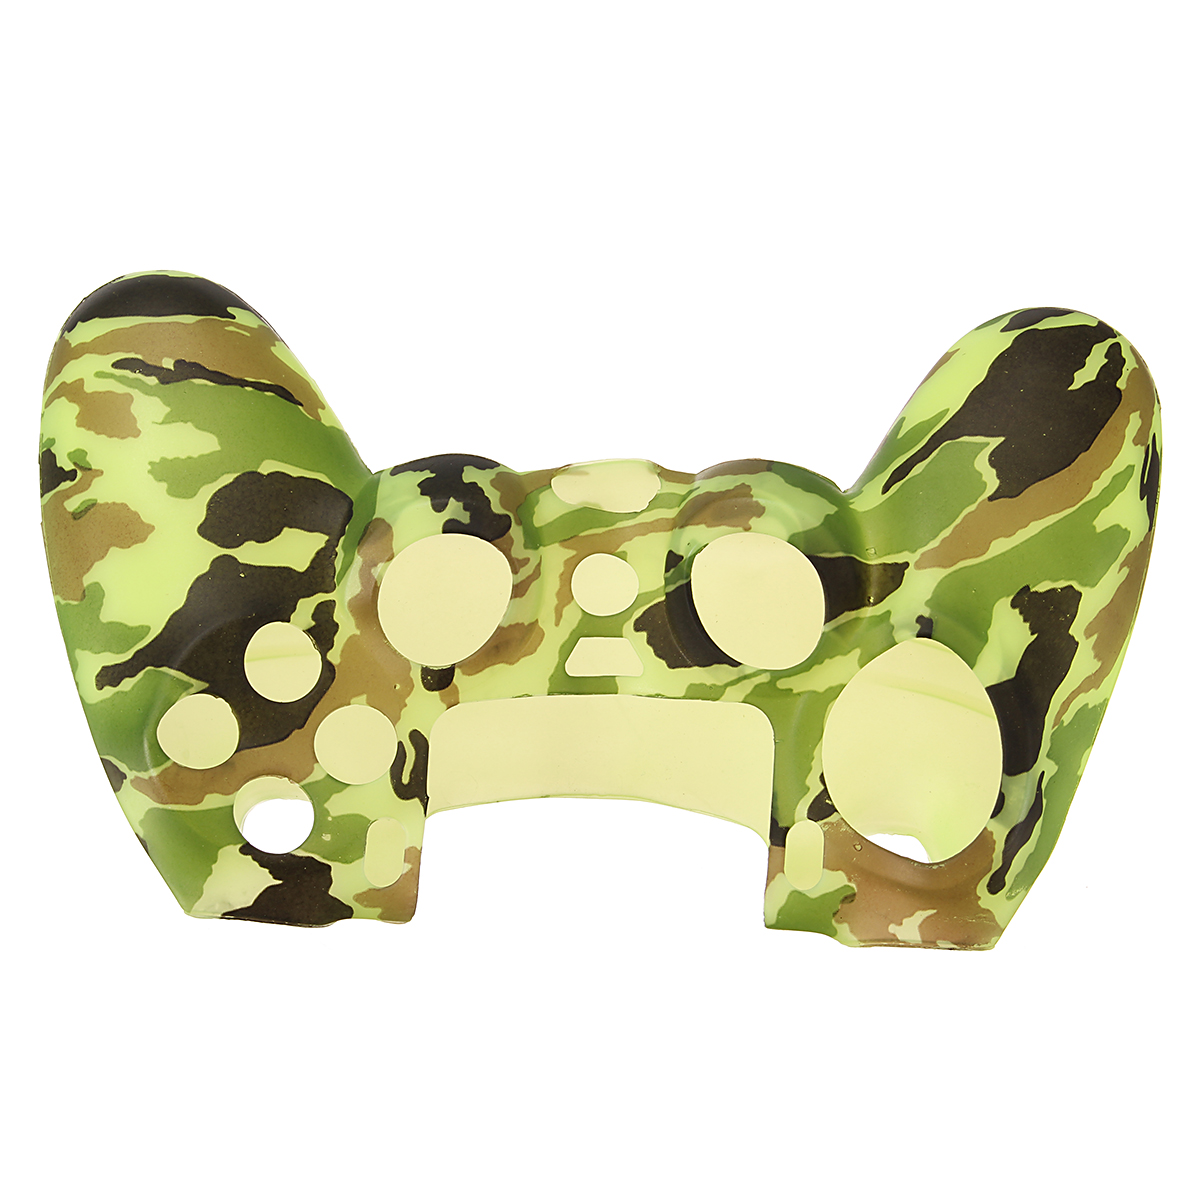 Durable Decal Camouflage Grip Cover Case Silicone Rubber Soft Skin Protector for Playstation 4 for Dualshock 4 Gamepad 6